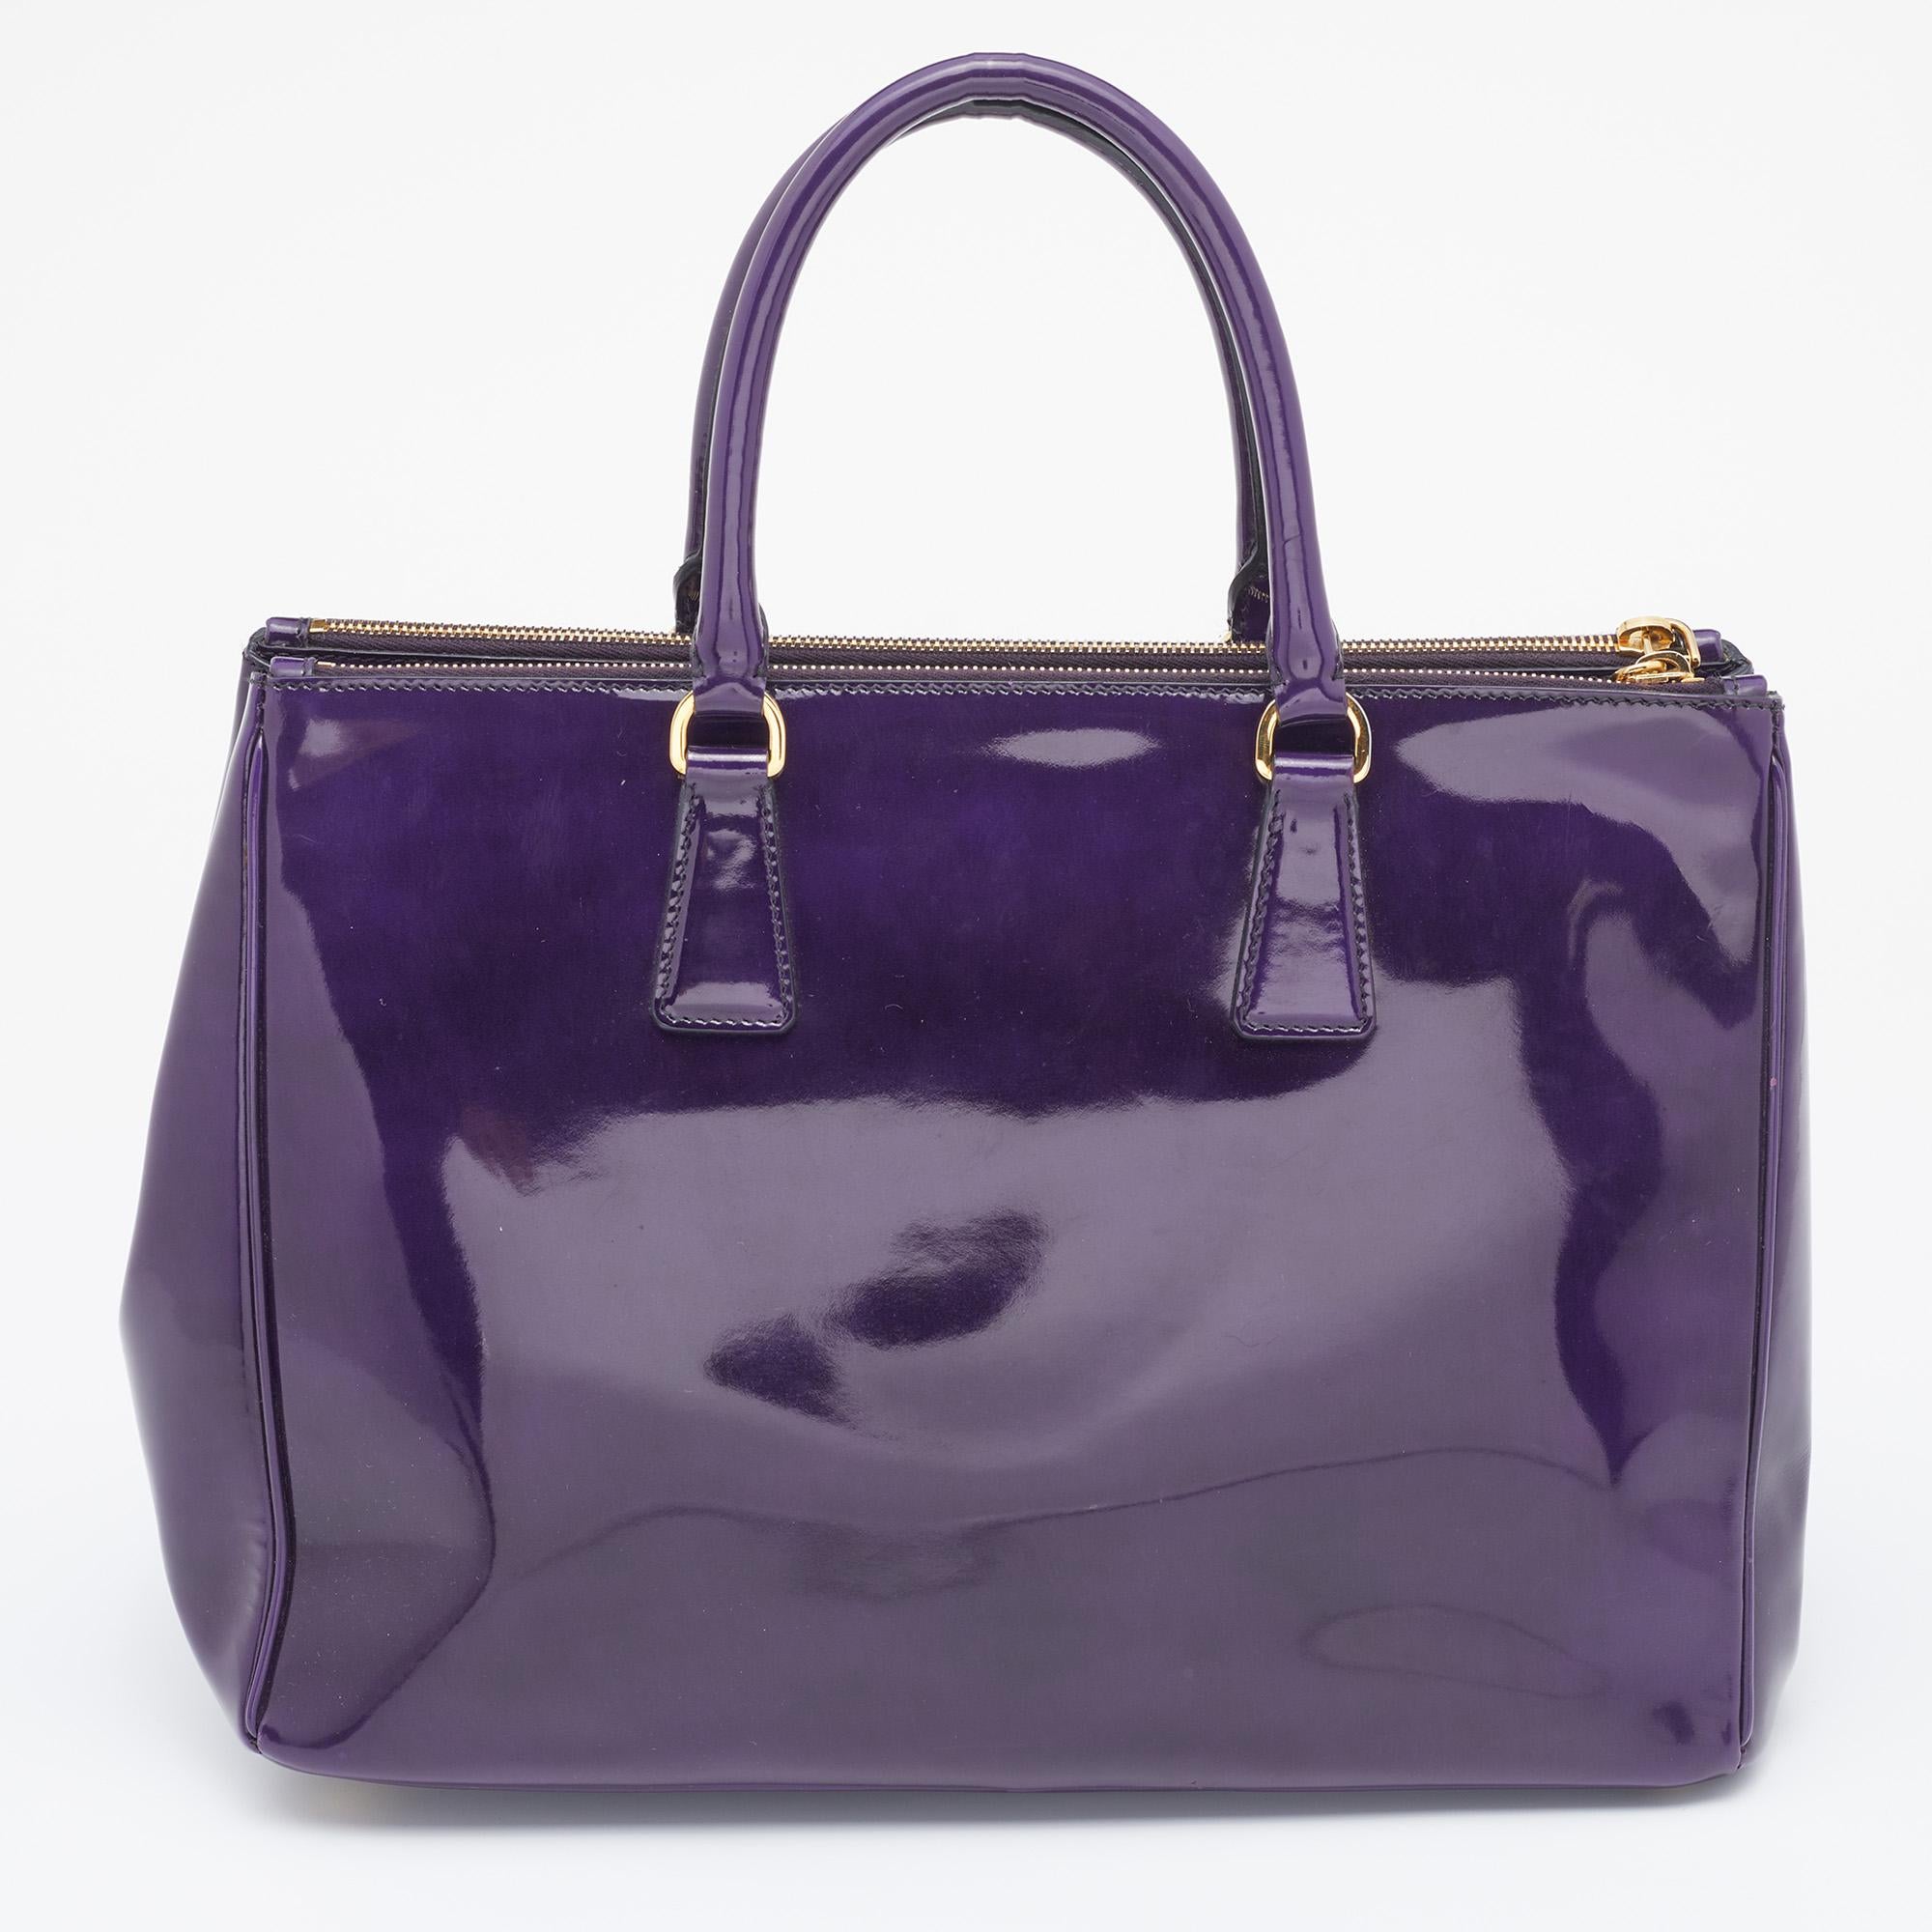 Loved for its classic appeal and functional design, Galleria is one of the most iconic bags from the house of Prada. This beauty in purple is crafted from Spazzolato leather and is equipped with two top handles, the brand logo at the front, and